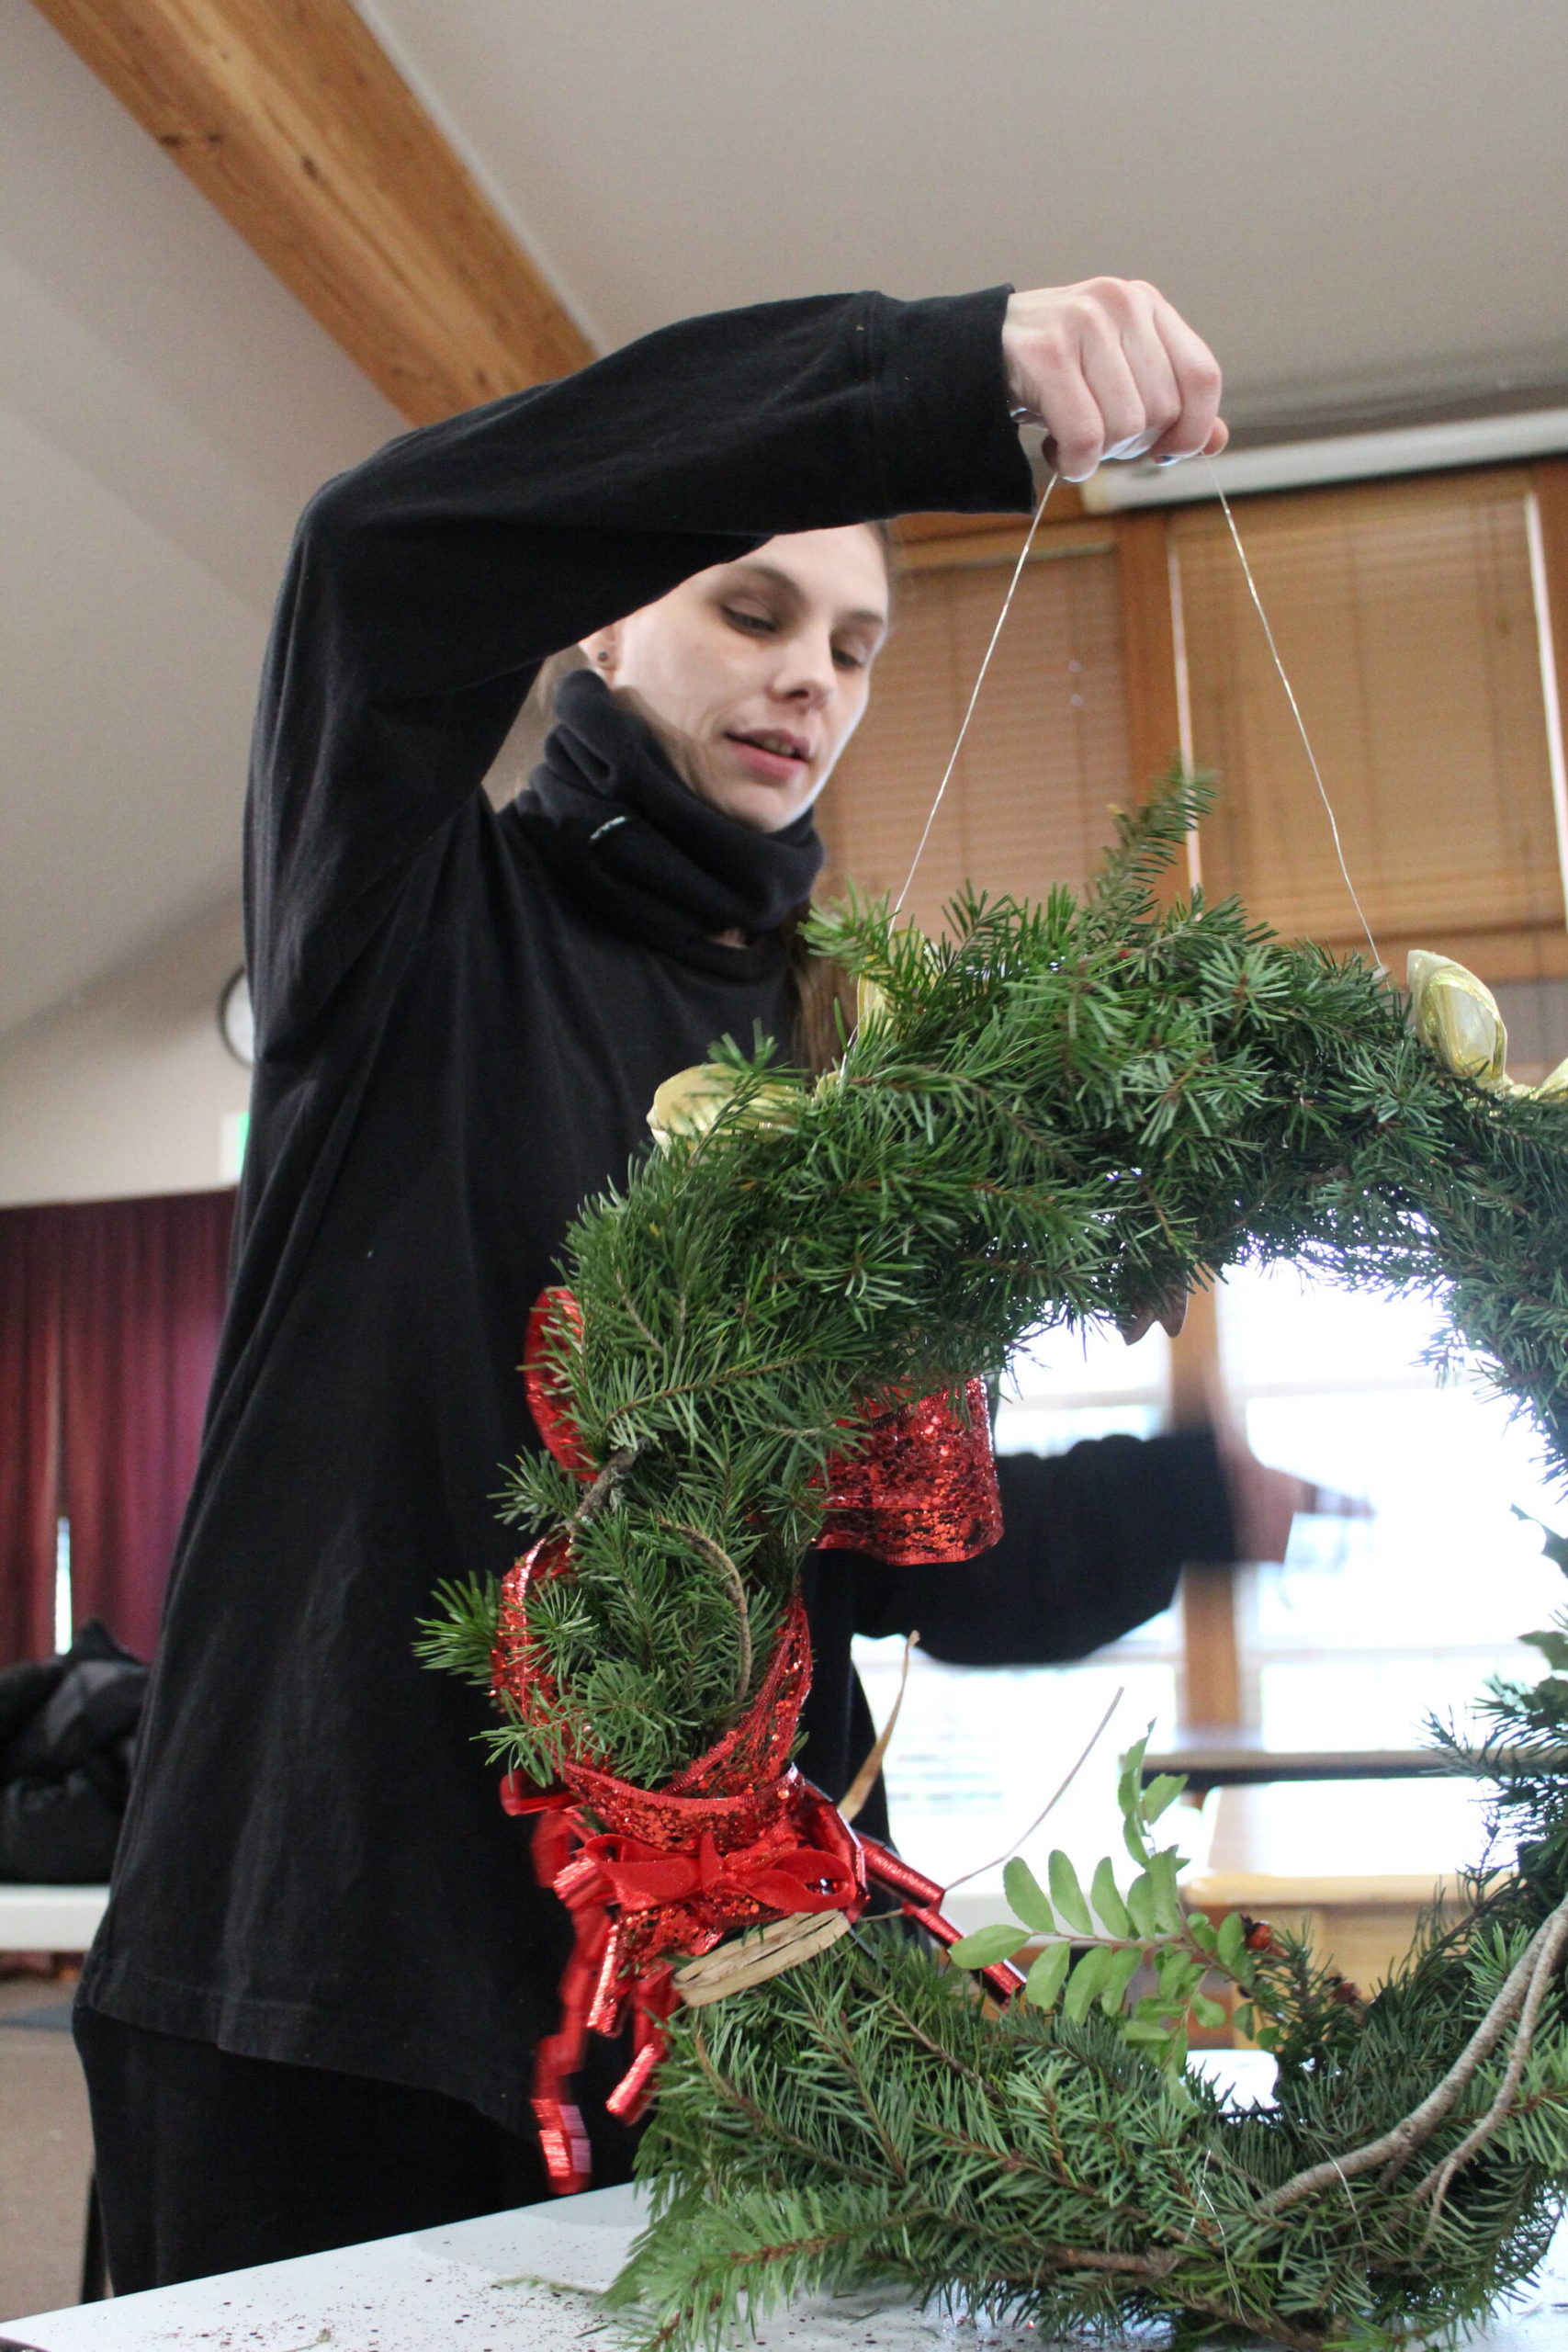 Pacific Rim Institute intern Dawn Meredith puts together a holiday wreath made of native plants.